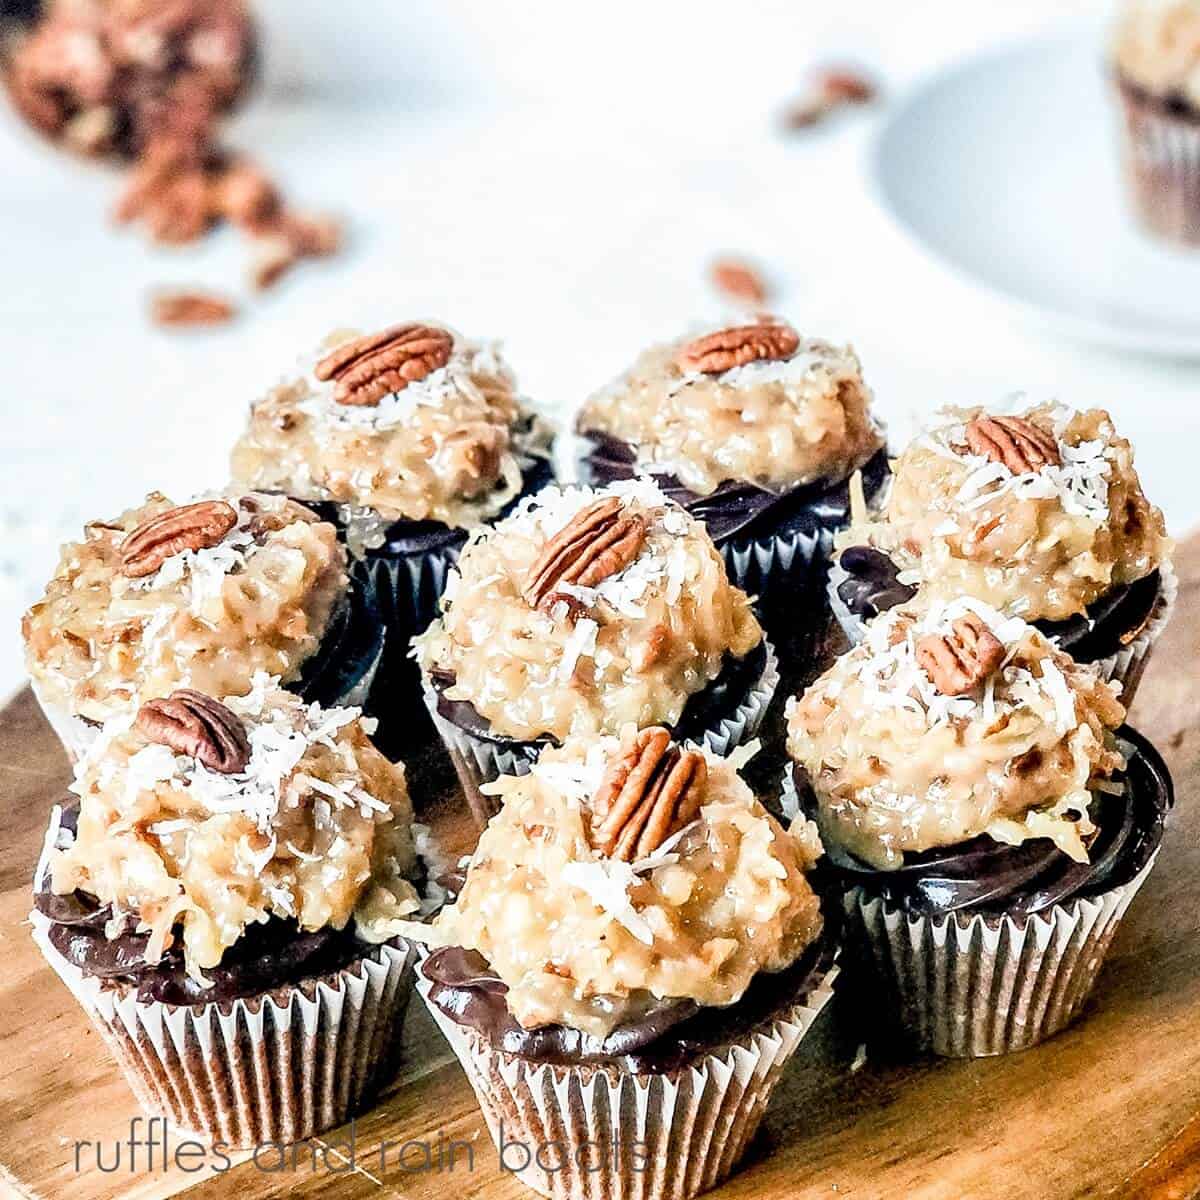 8 German chocolate cupcakes against a white surface with pecans in the background with a plate with a cupcake on it.